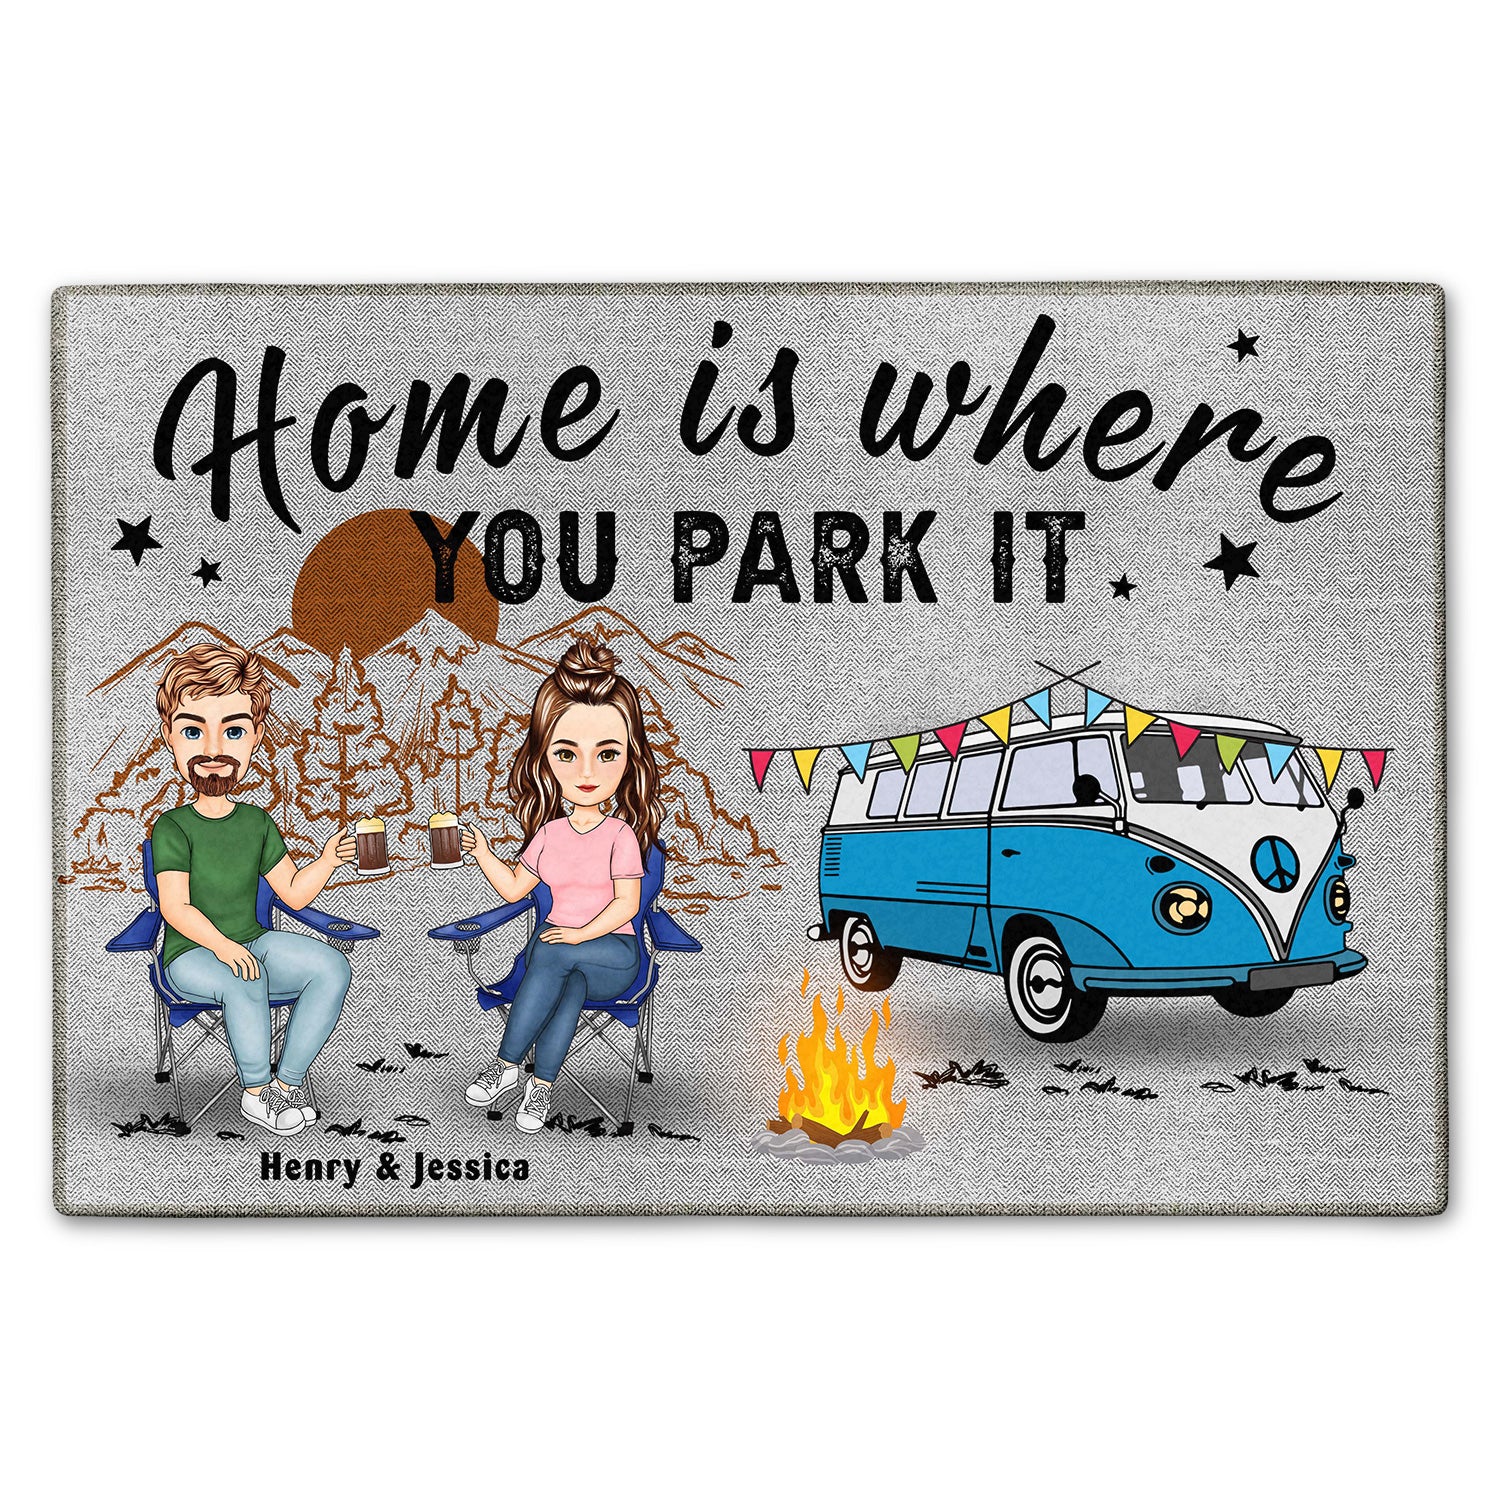 Making Memories One Campsite At A Time Cartoon - Gift For Camping Couples - Personalized Doormat